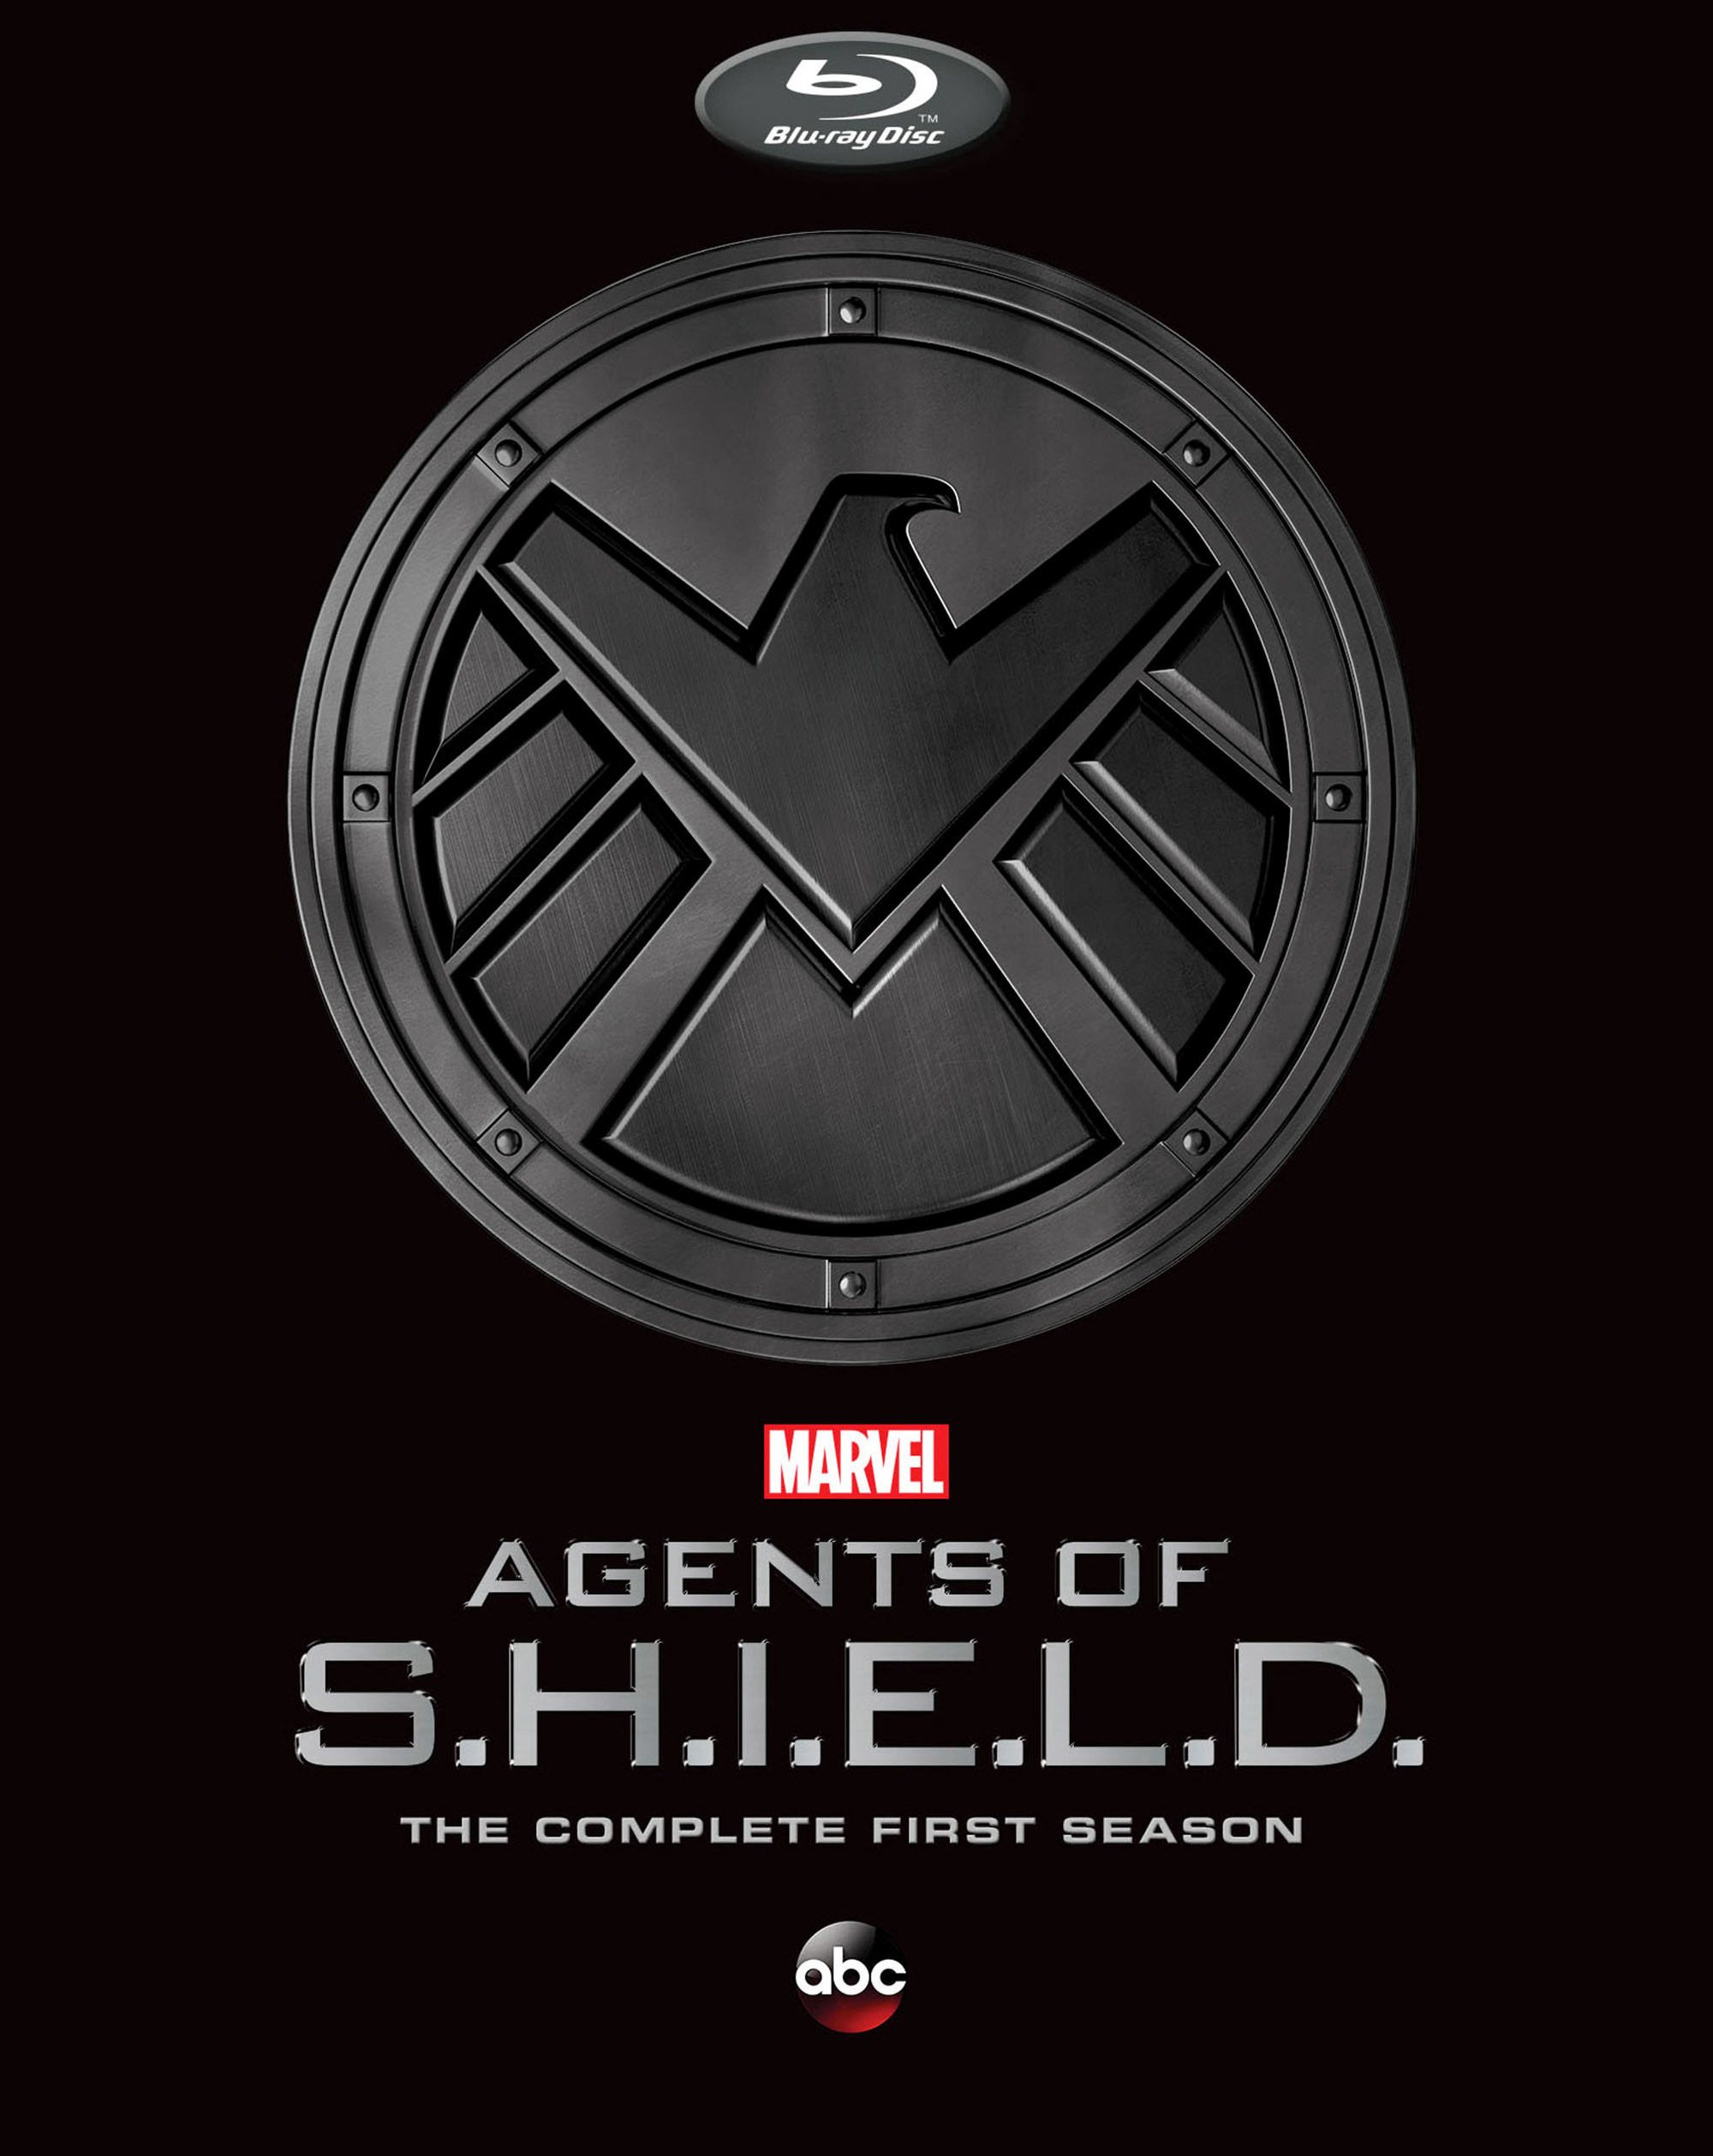 MARVEL Agents of SHIELD TV Series Season 1 Cast Promo Pictures | DVDbash